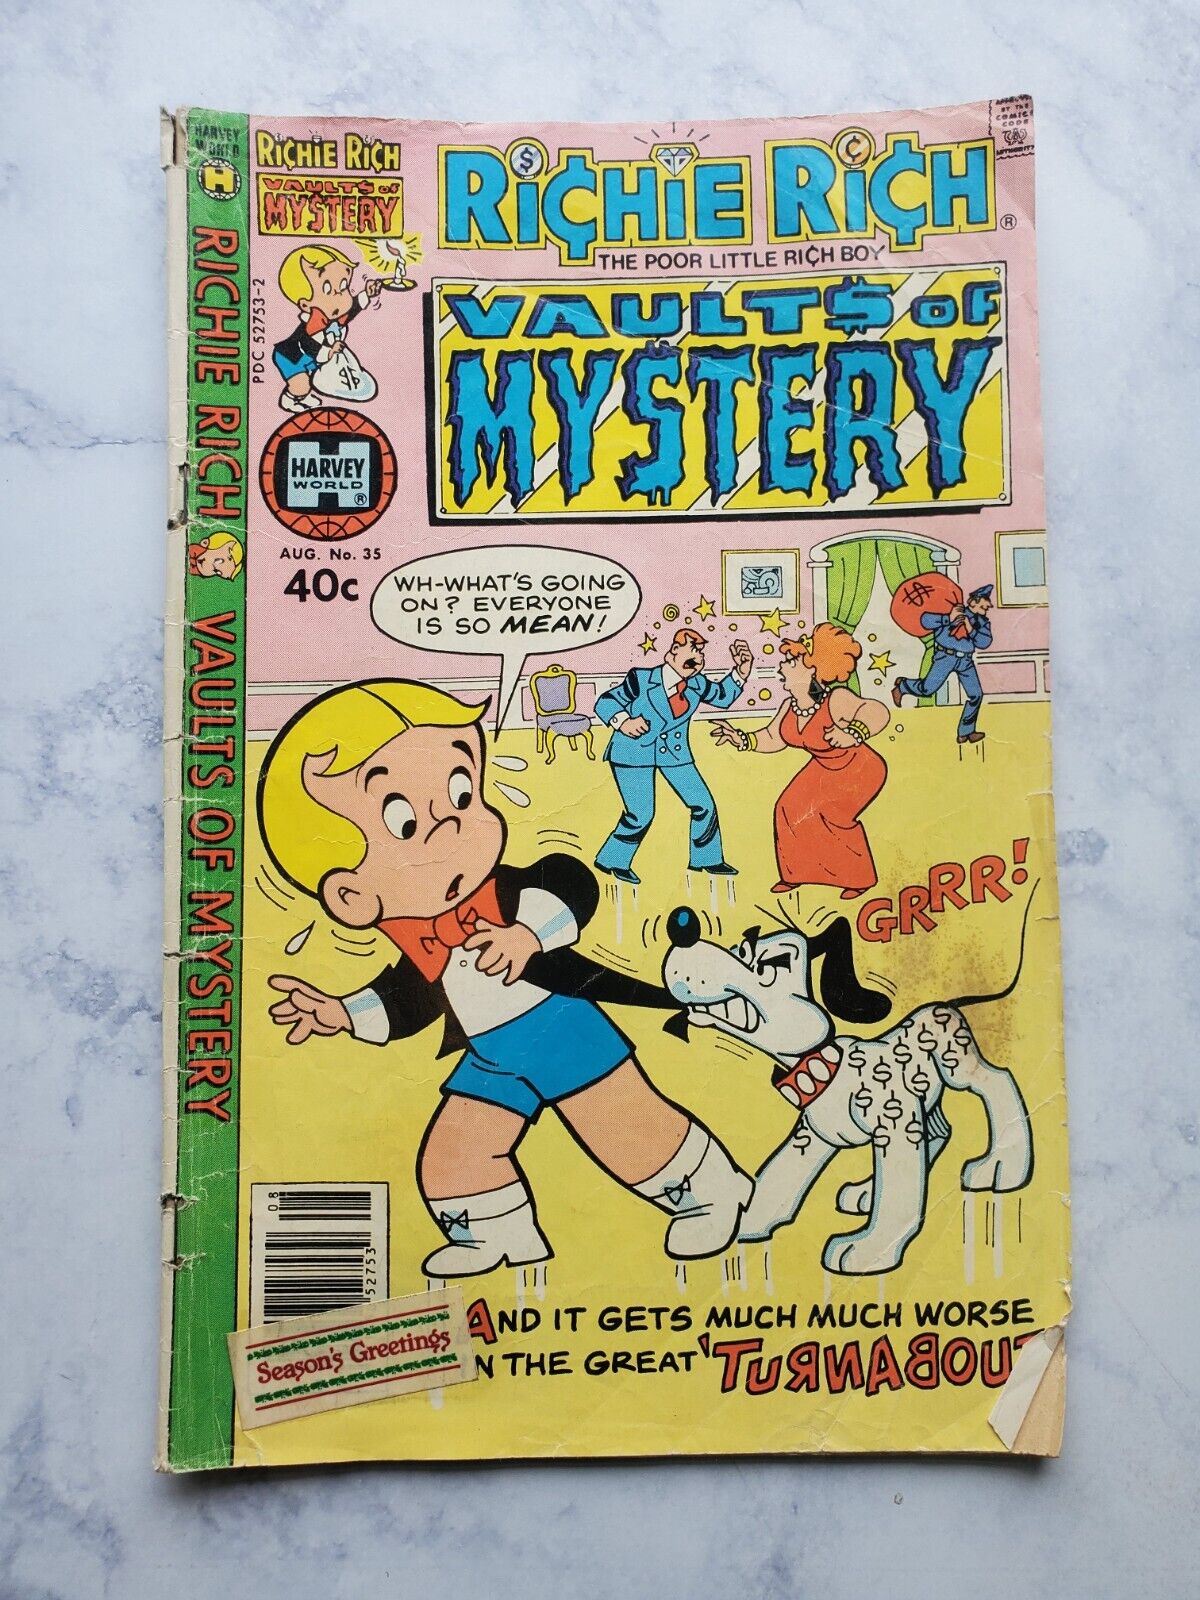 No 35 - Aug 1980 - Richie Rich Vaults Of Mystery - Comic Book